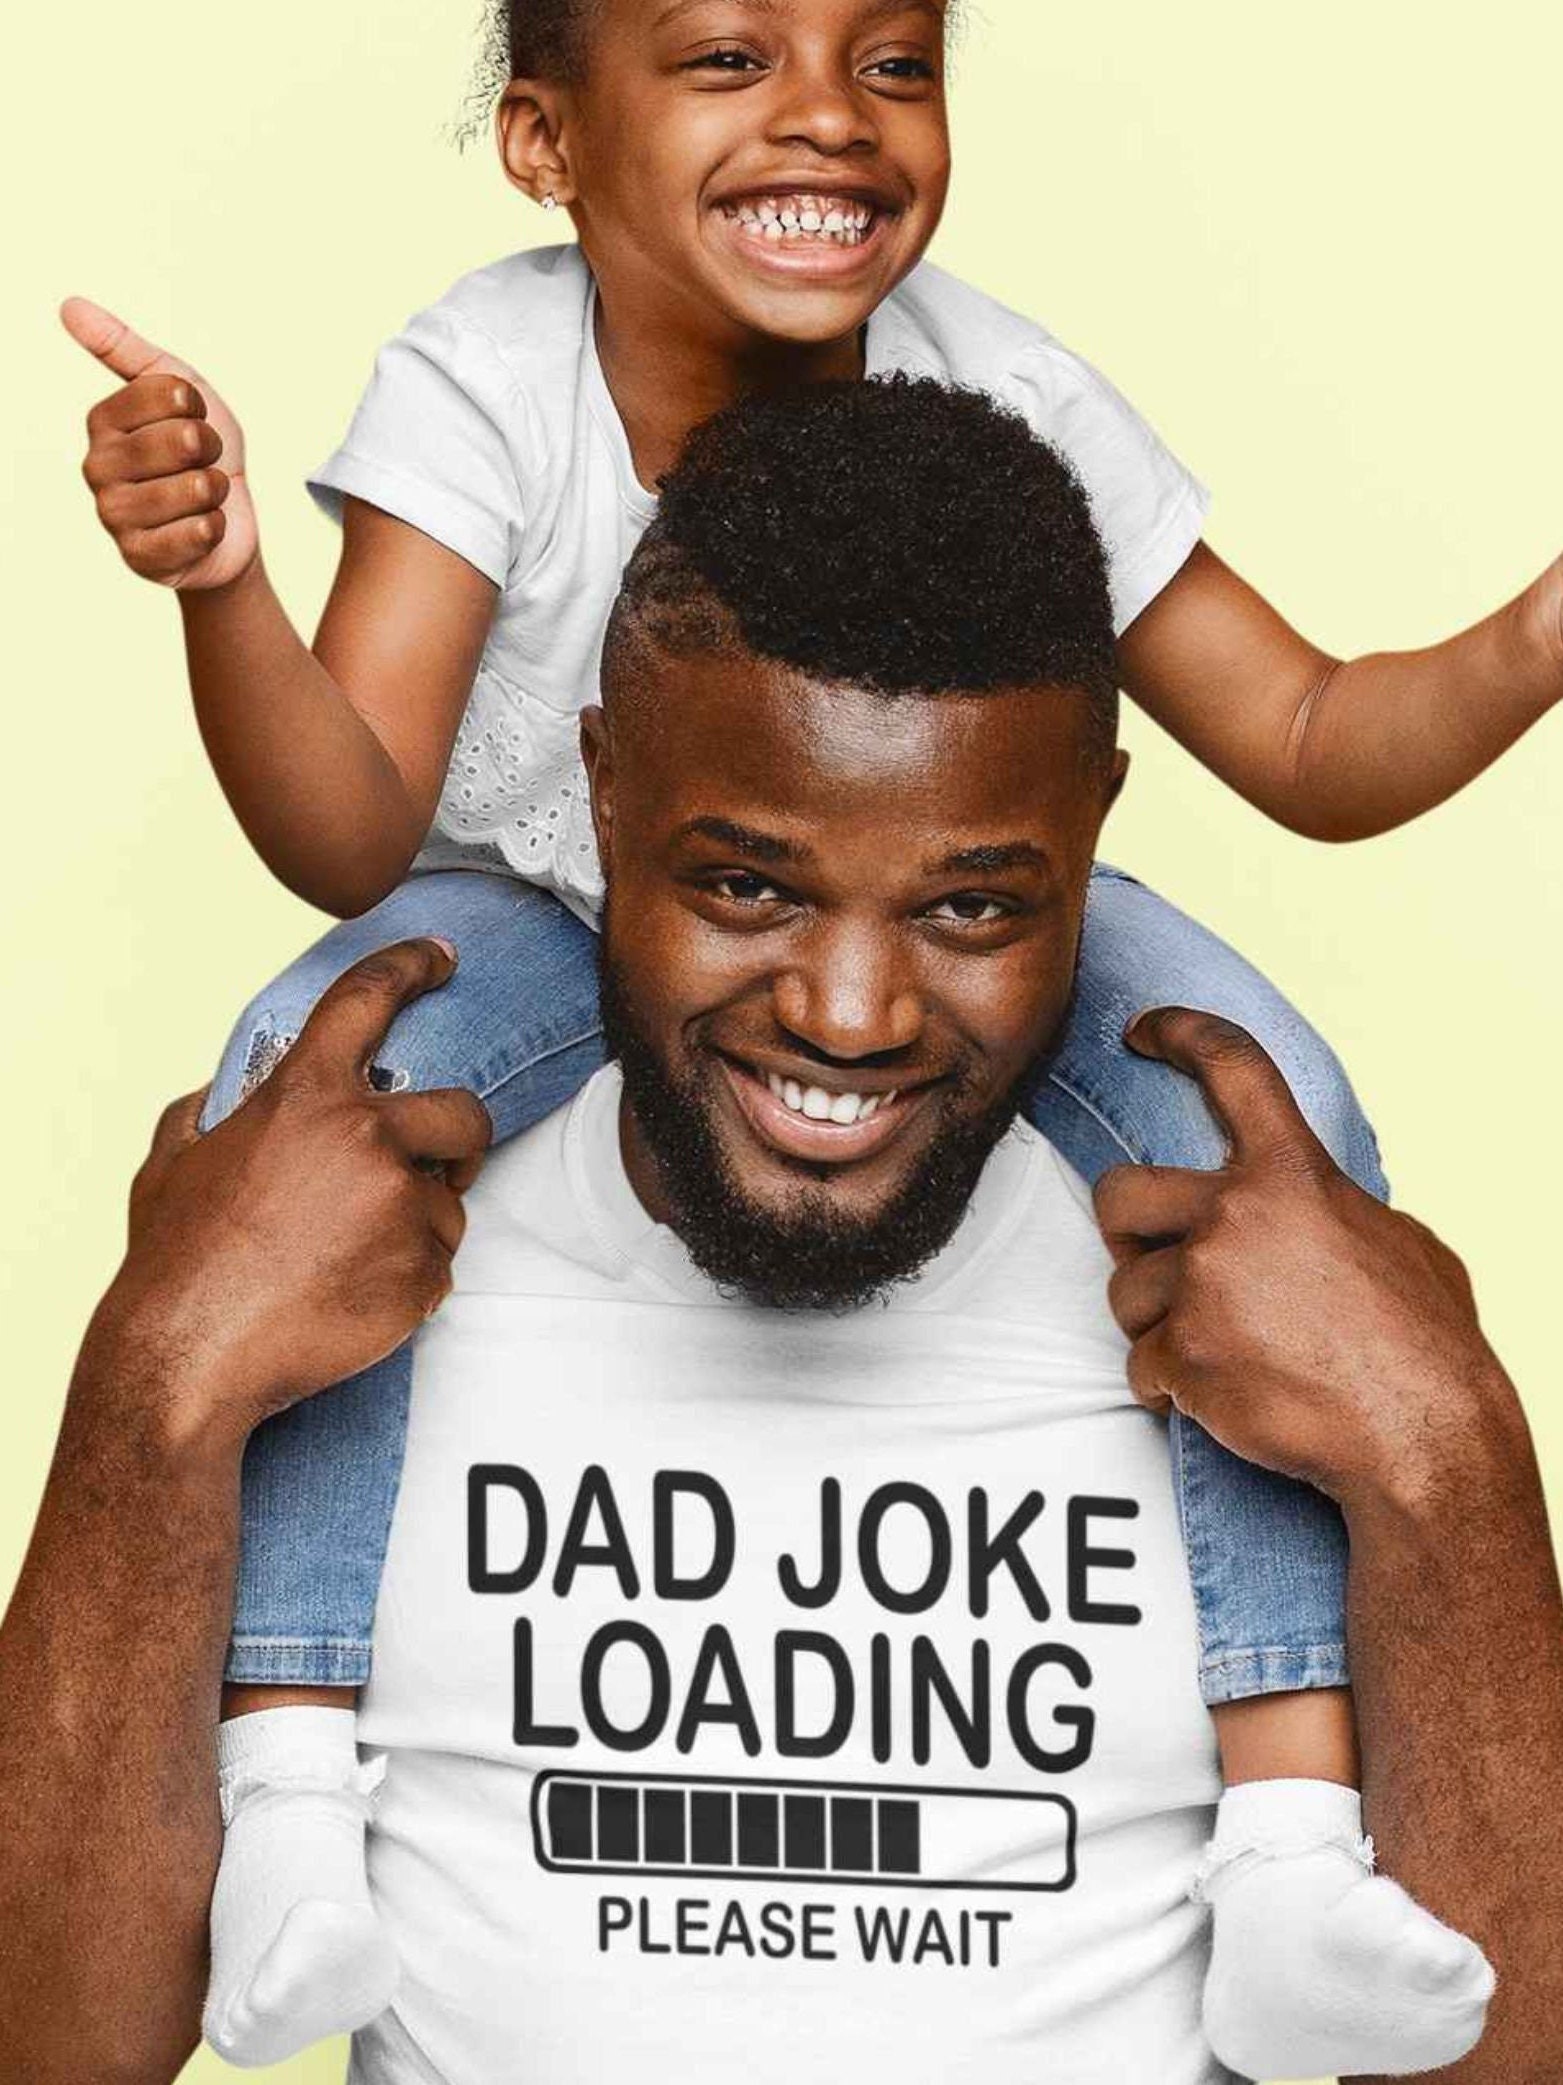 Dad Gift T-Shirt Joke Loading, Jokes Fathers Day Family Presents, Birthday For Daddy Shirt Xmas Gifts Tee Tops